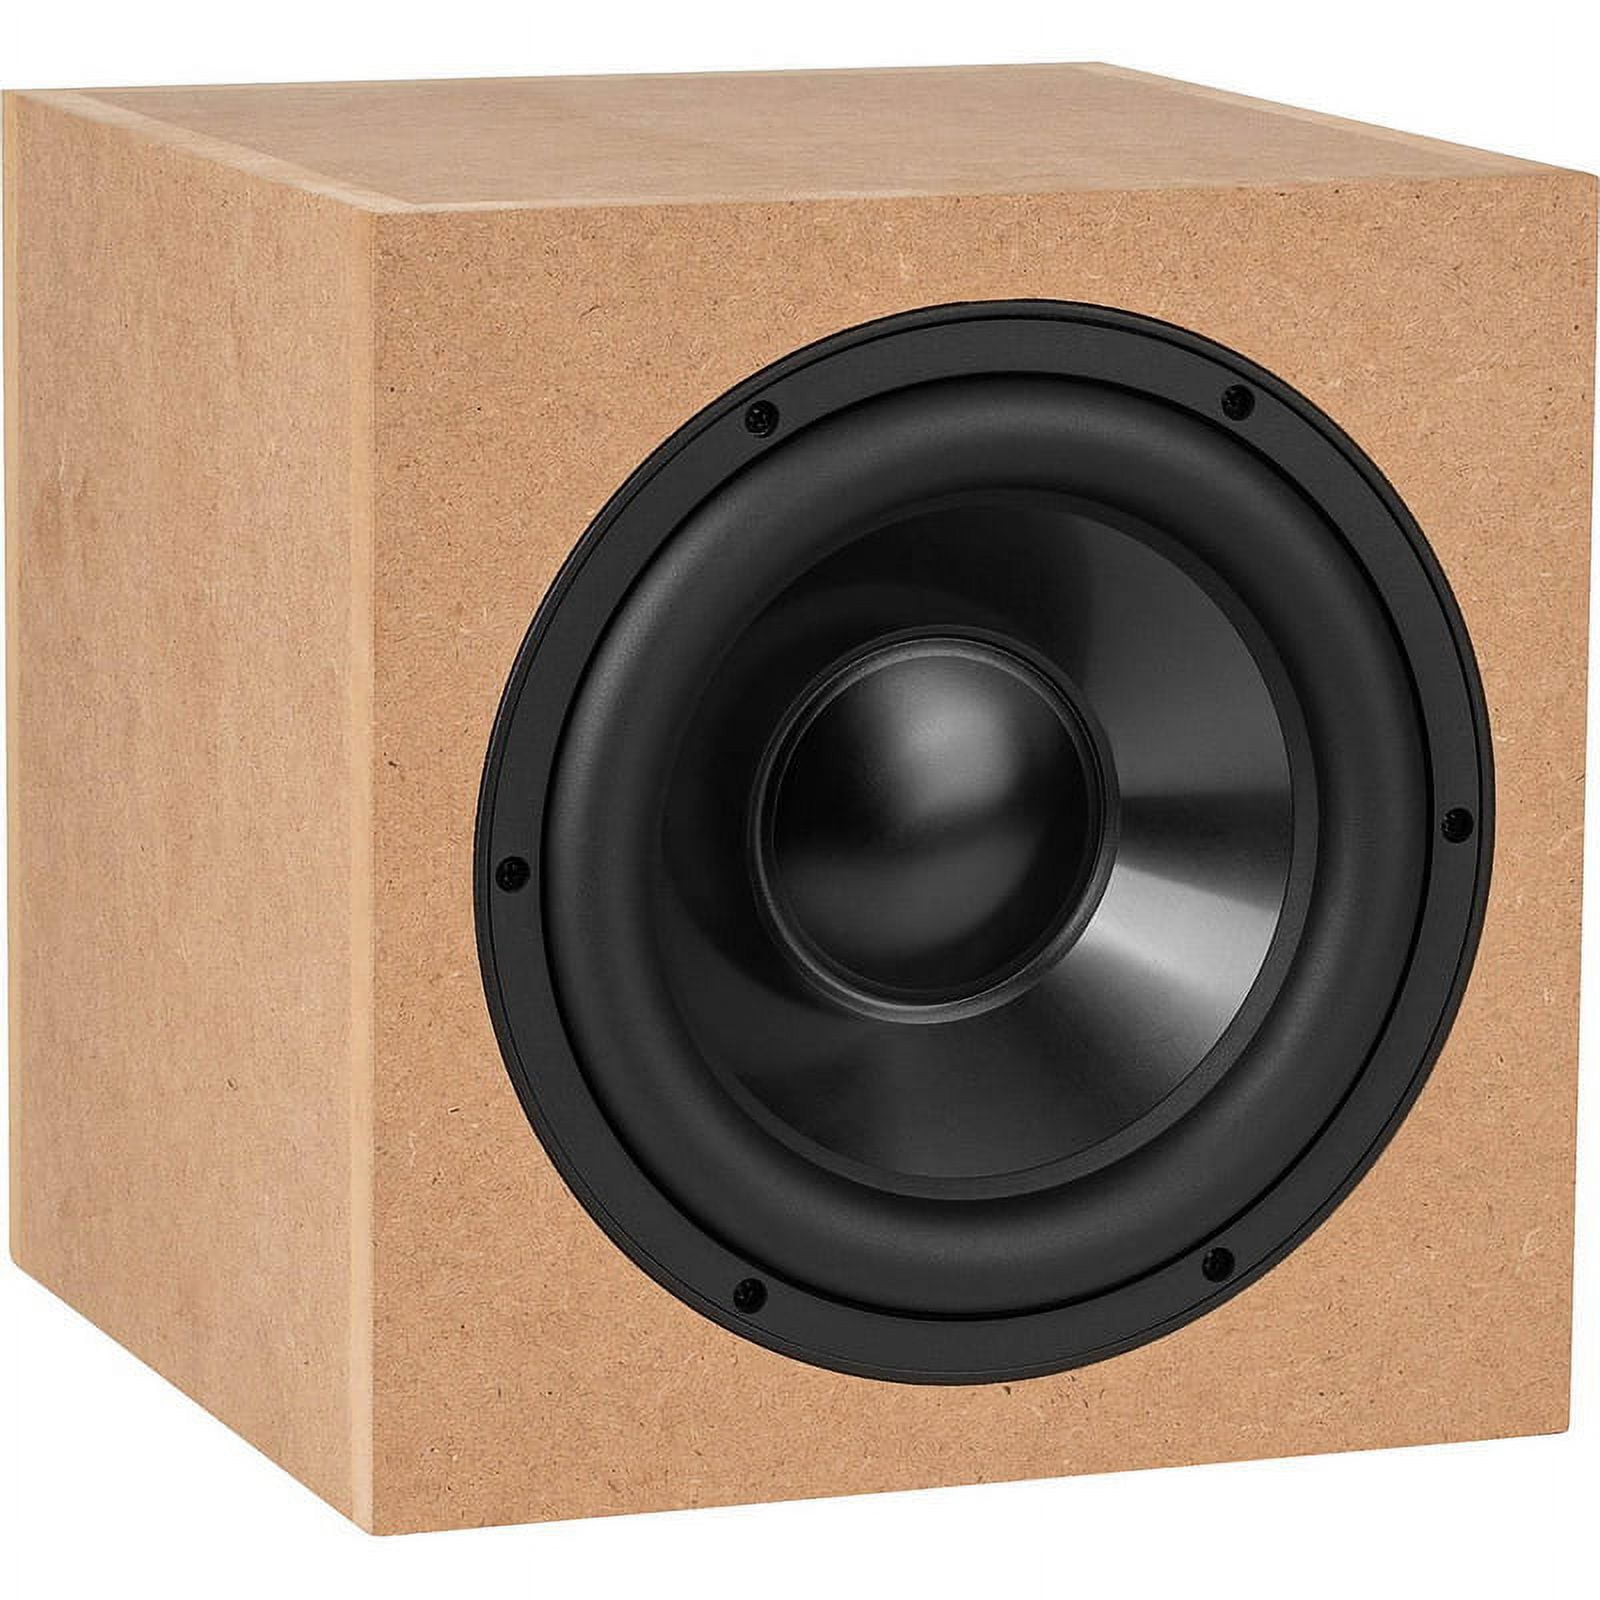 What does a 15 USD BT speaker look like (RP Minis Mini Subwoofer